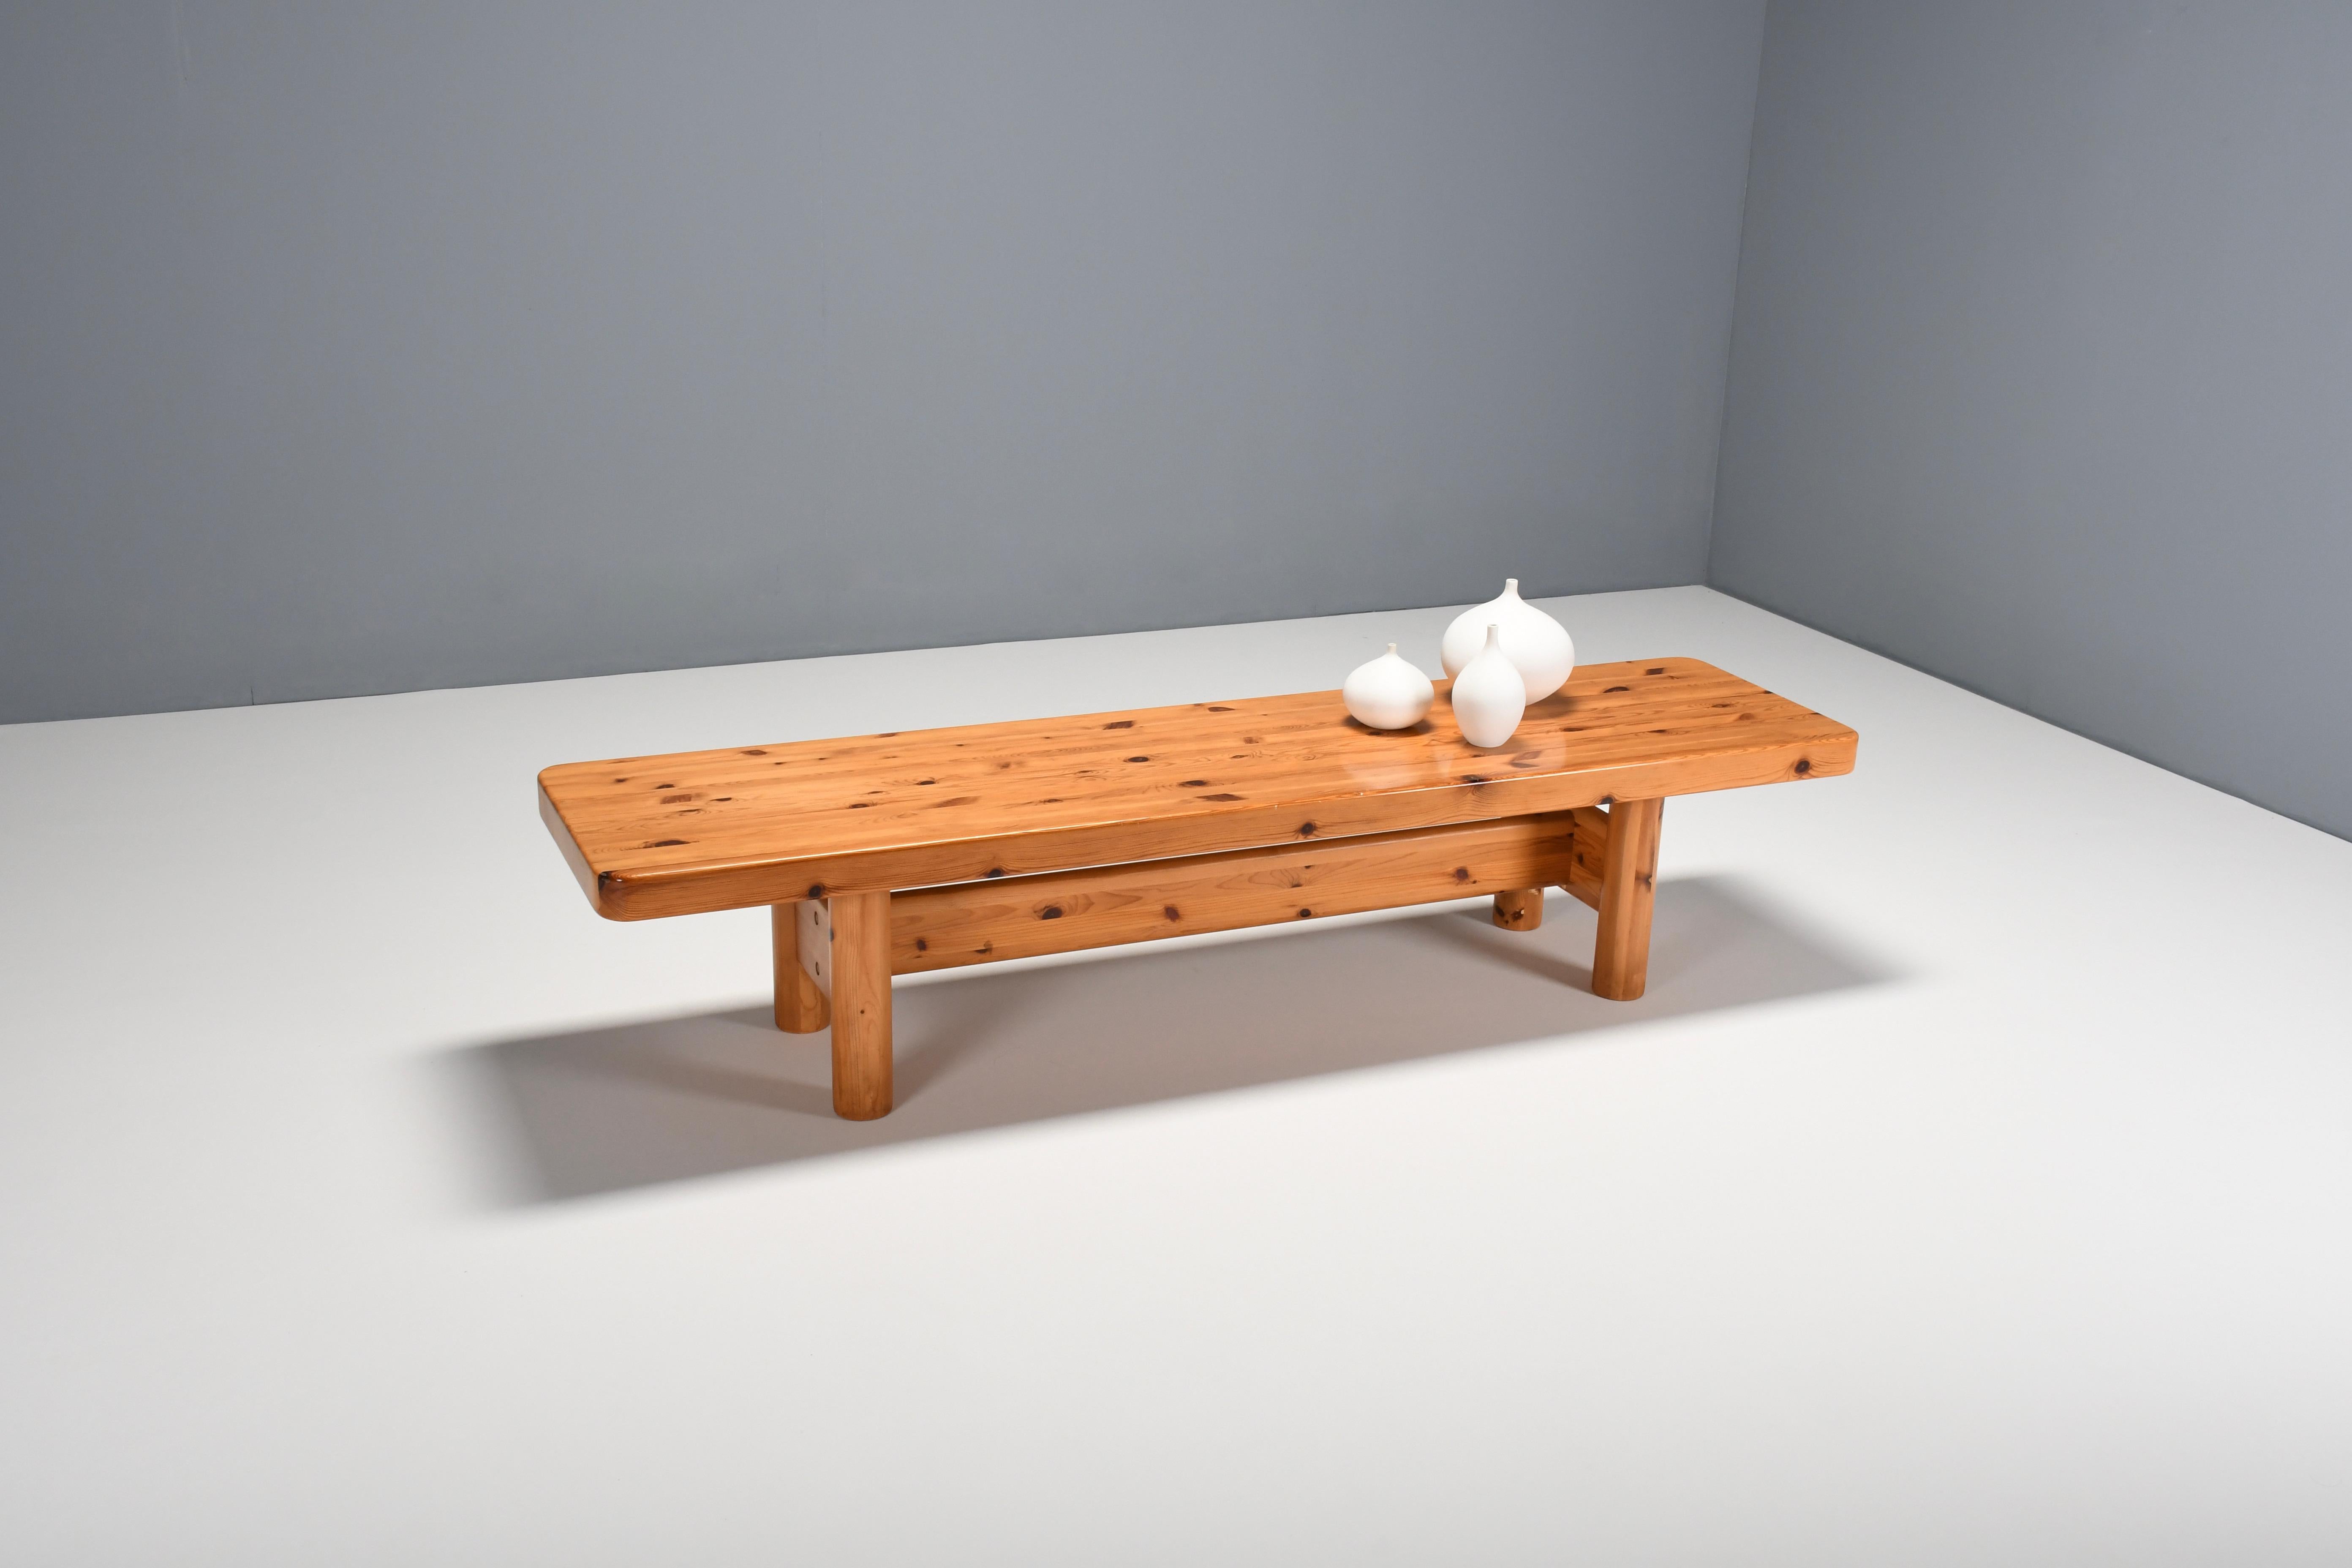 20th Century Pine Wood Bench/Console Table by Rainer Daumiller for Hirtshals Savværk, Denmark For Sale